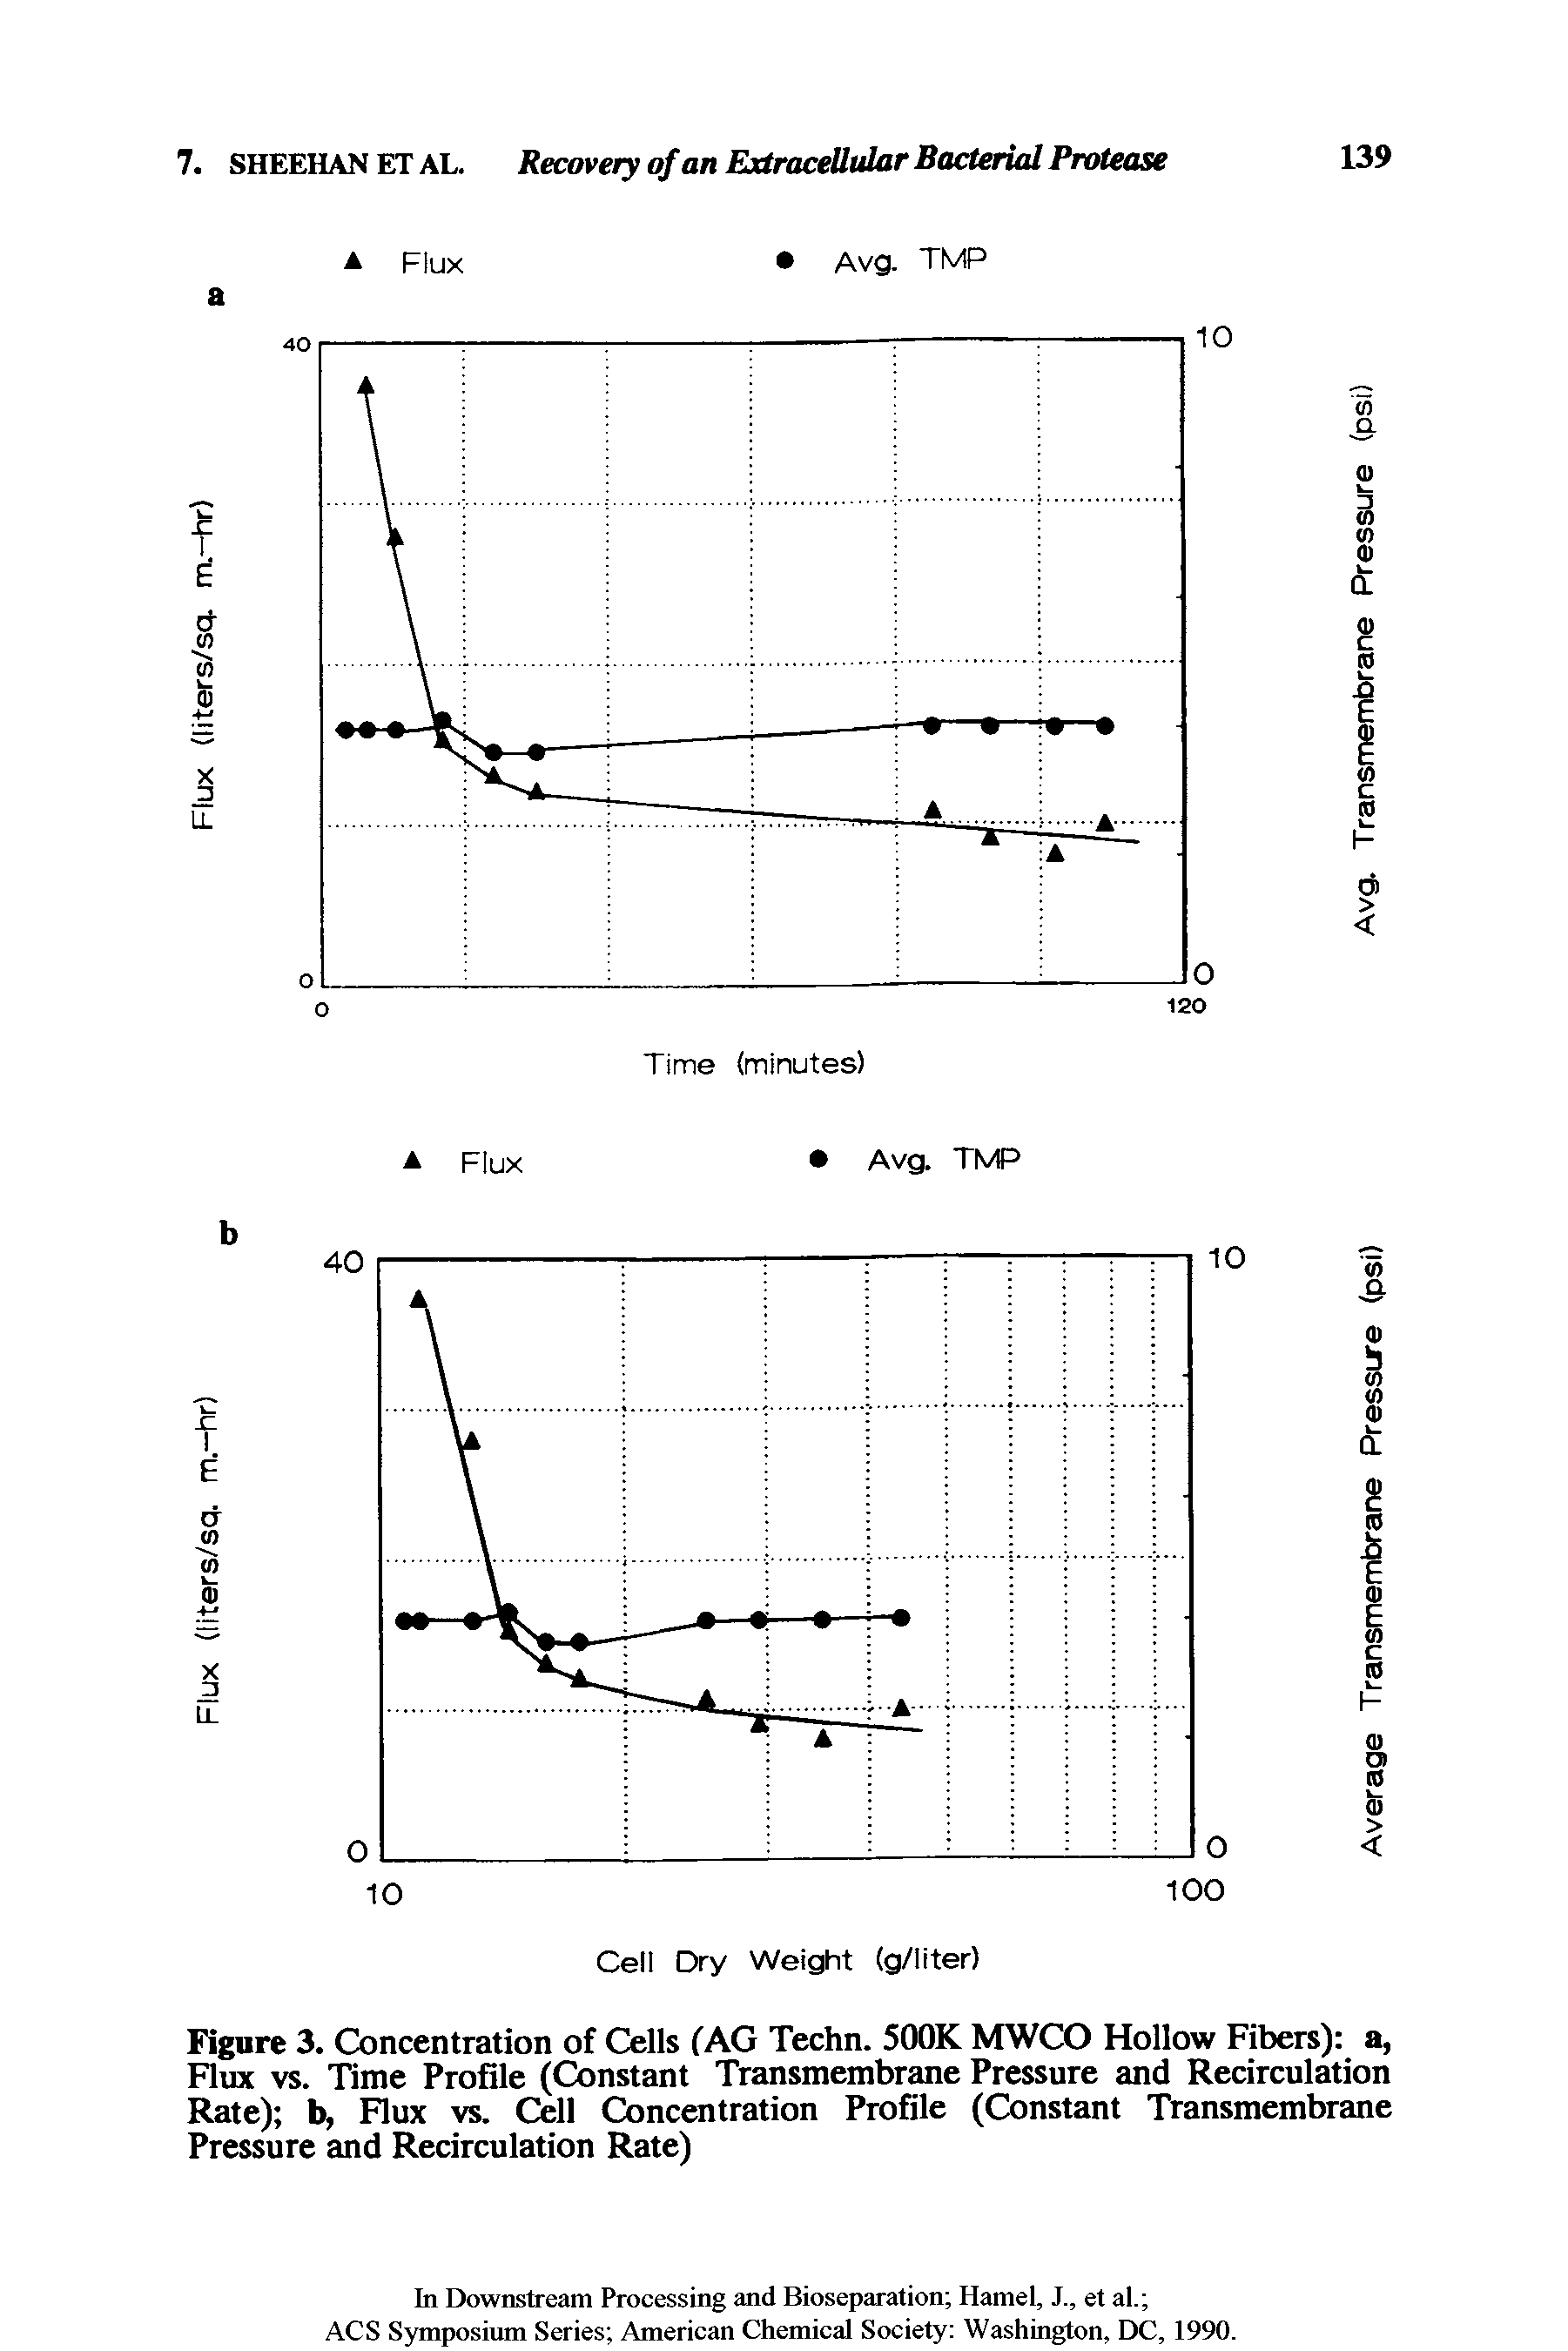 Figure 3. Concentration of Cells f AG Techn. 500K MWCO Hollow Fibers) a, Flux vs. Time Profile (Constant Transmembrane Pressure and Recirculation Rate) b, Flux vs. Cell Concentration Profile (Constant Transmembrane Pressure and Recirculation Rate)...